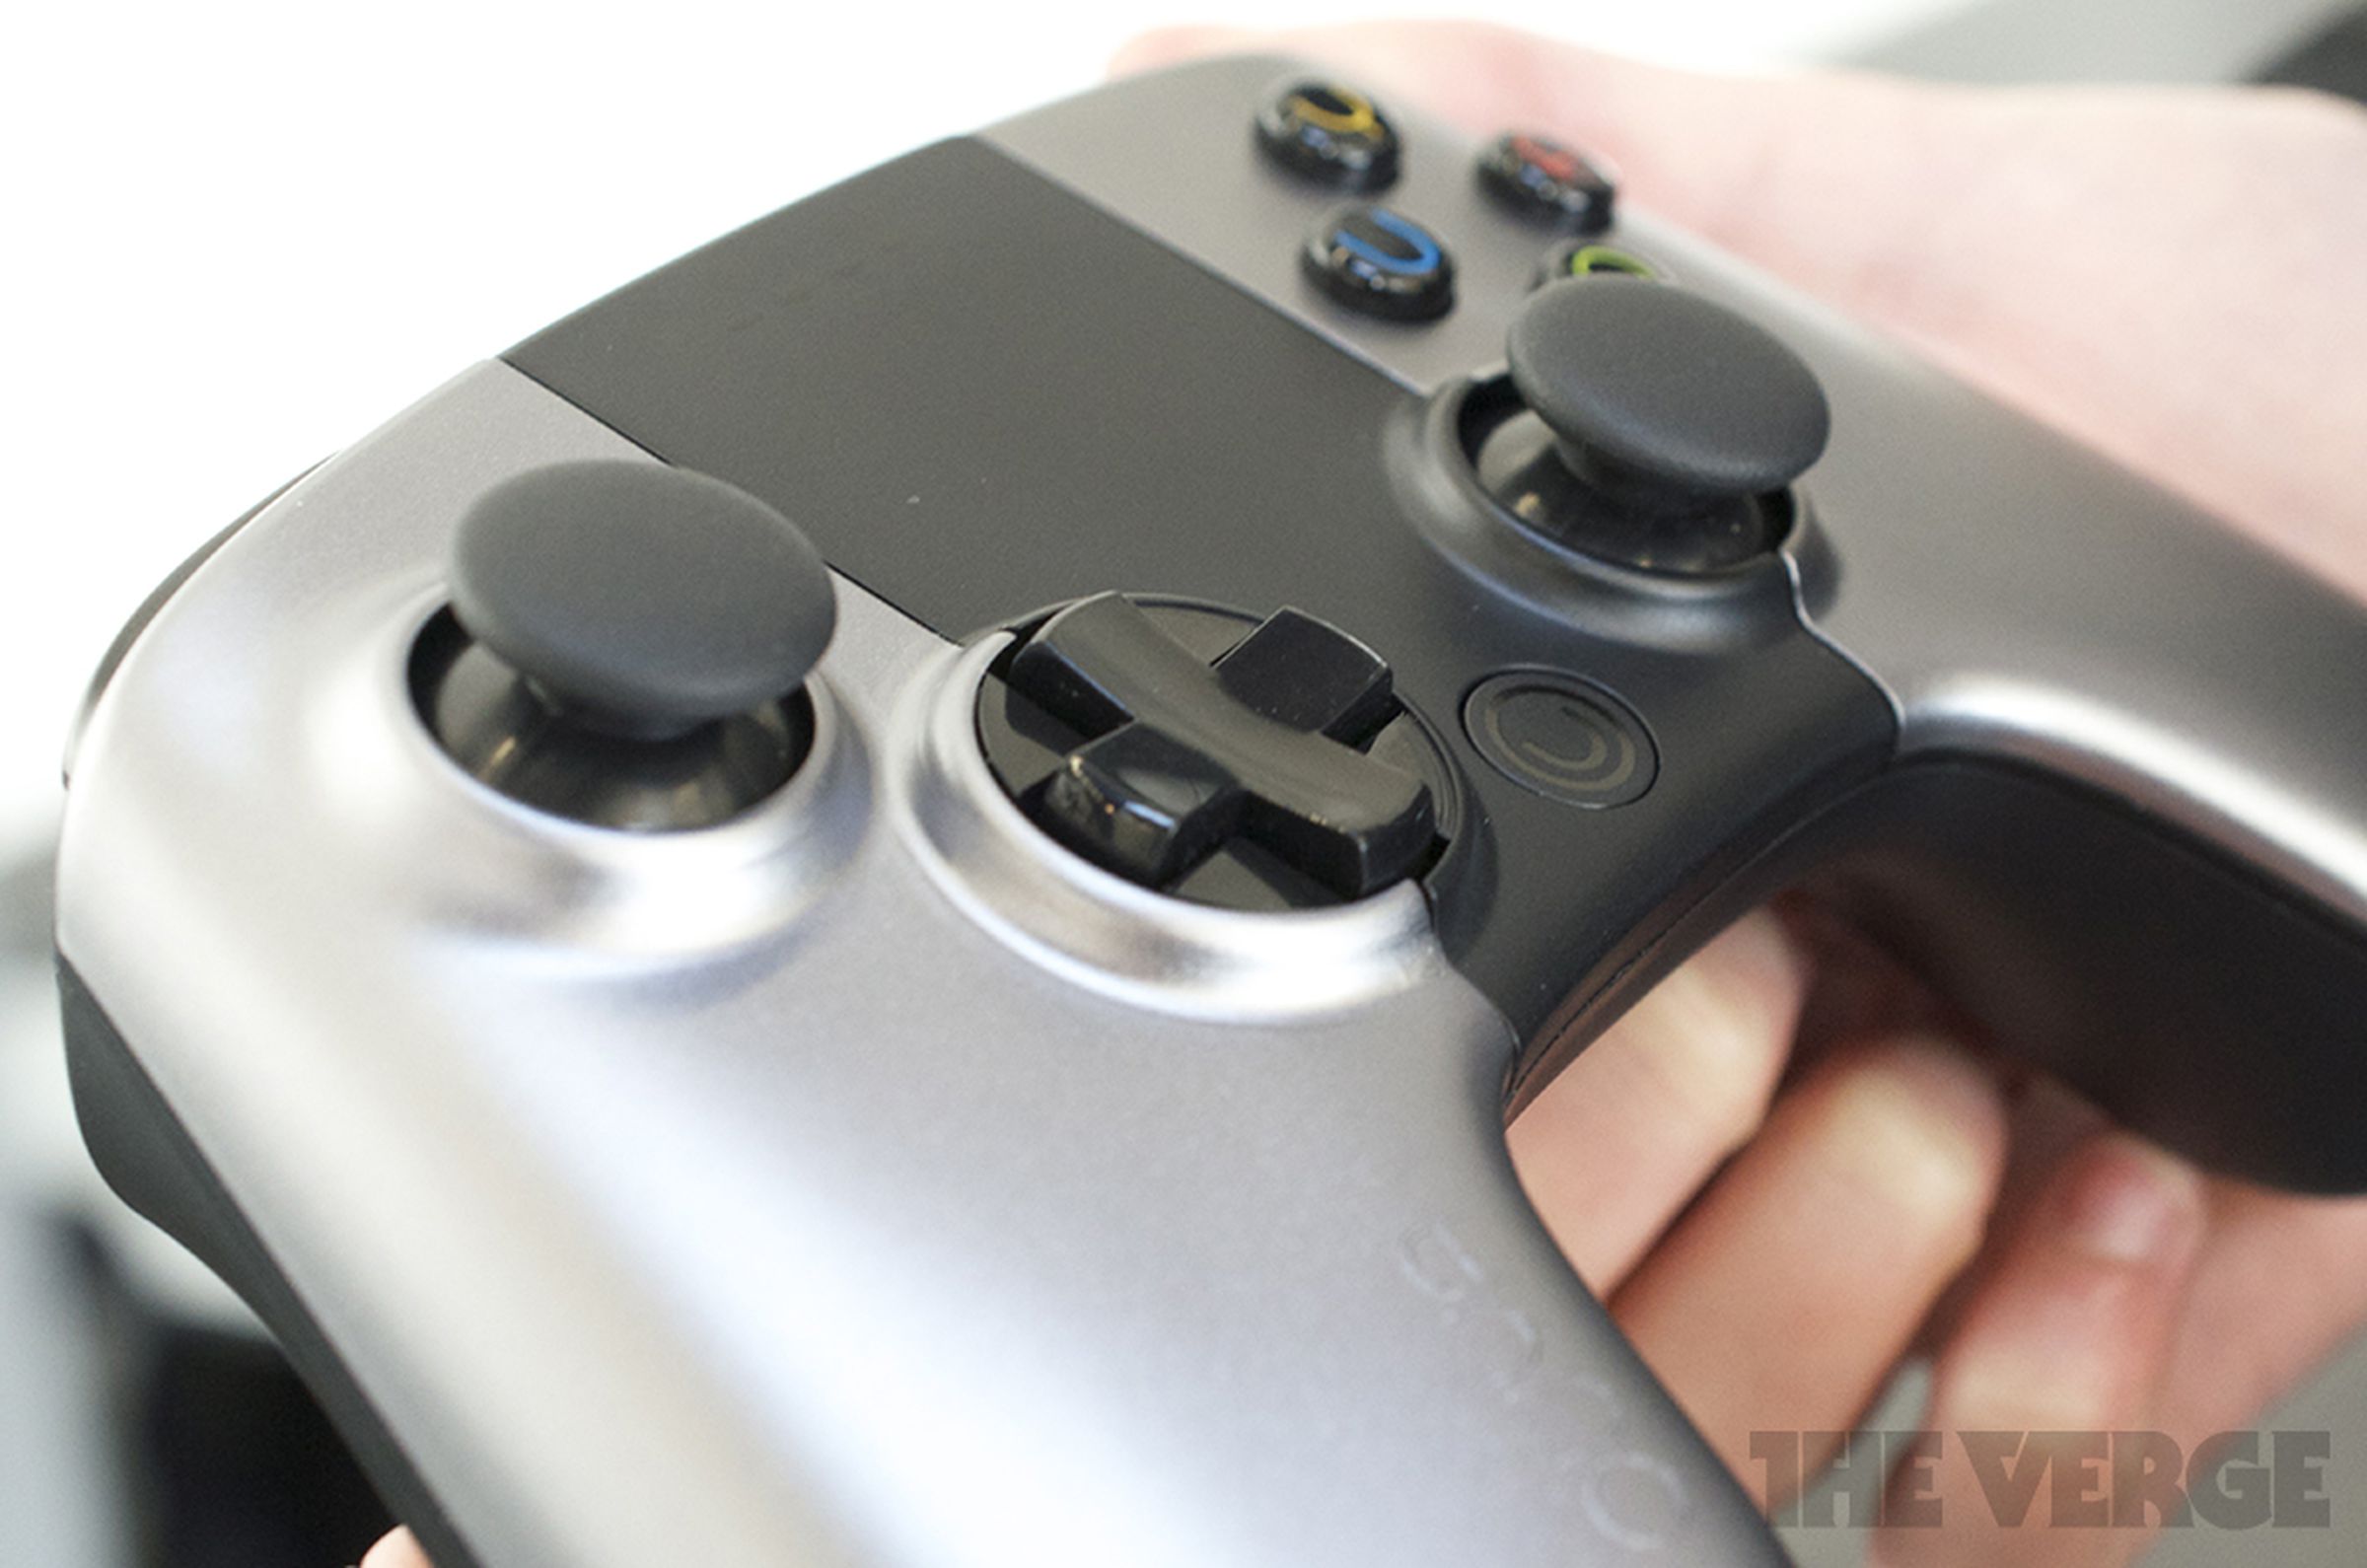 Ouya Android game console hands-on photos